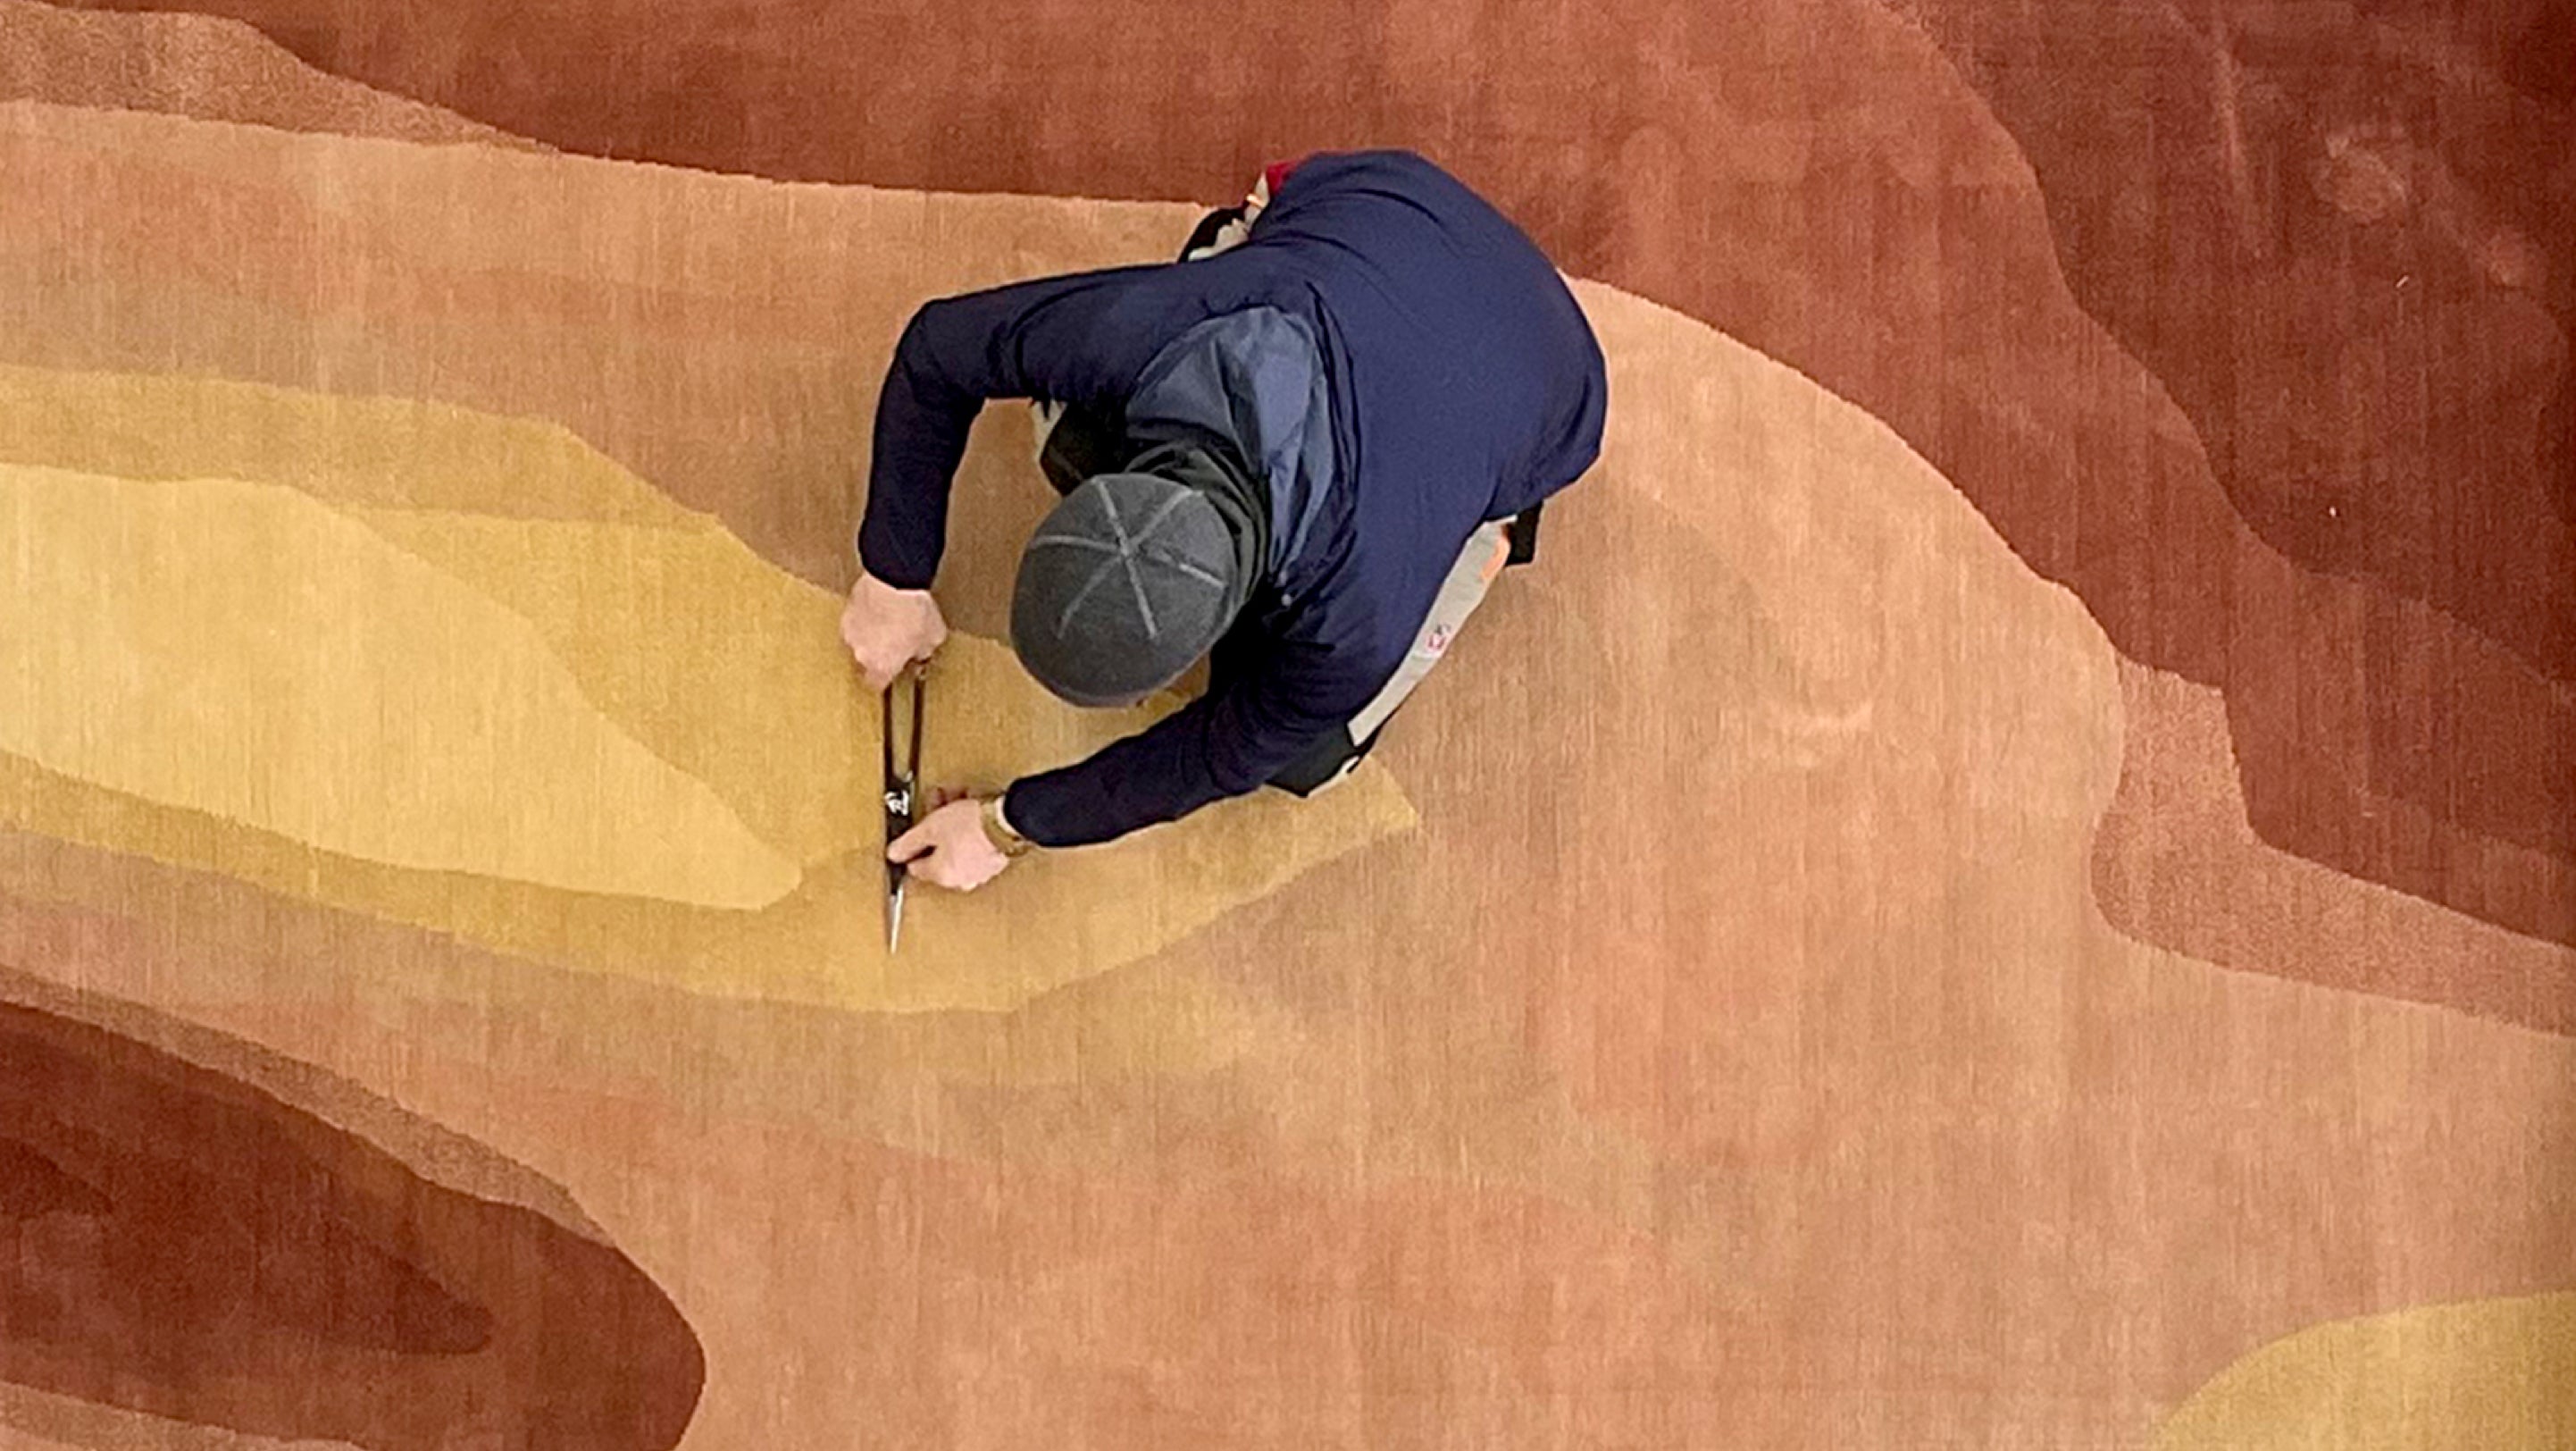 An aerial view of a man working on a rug